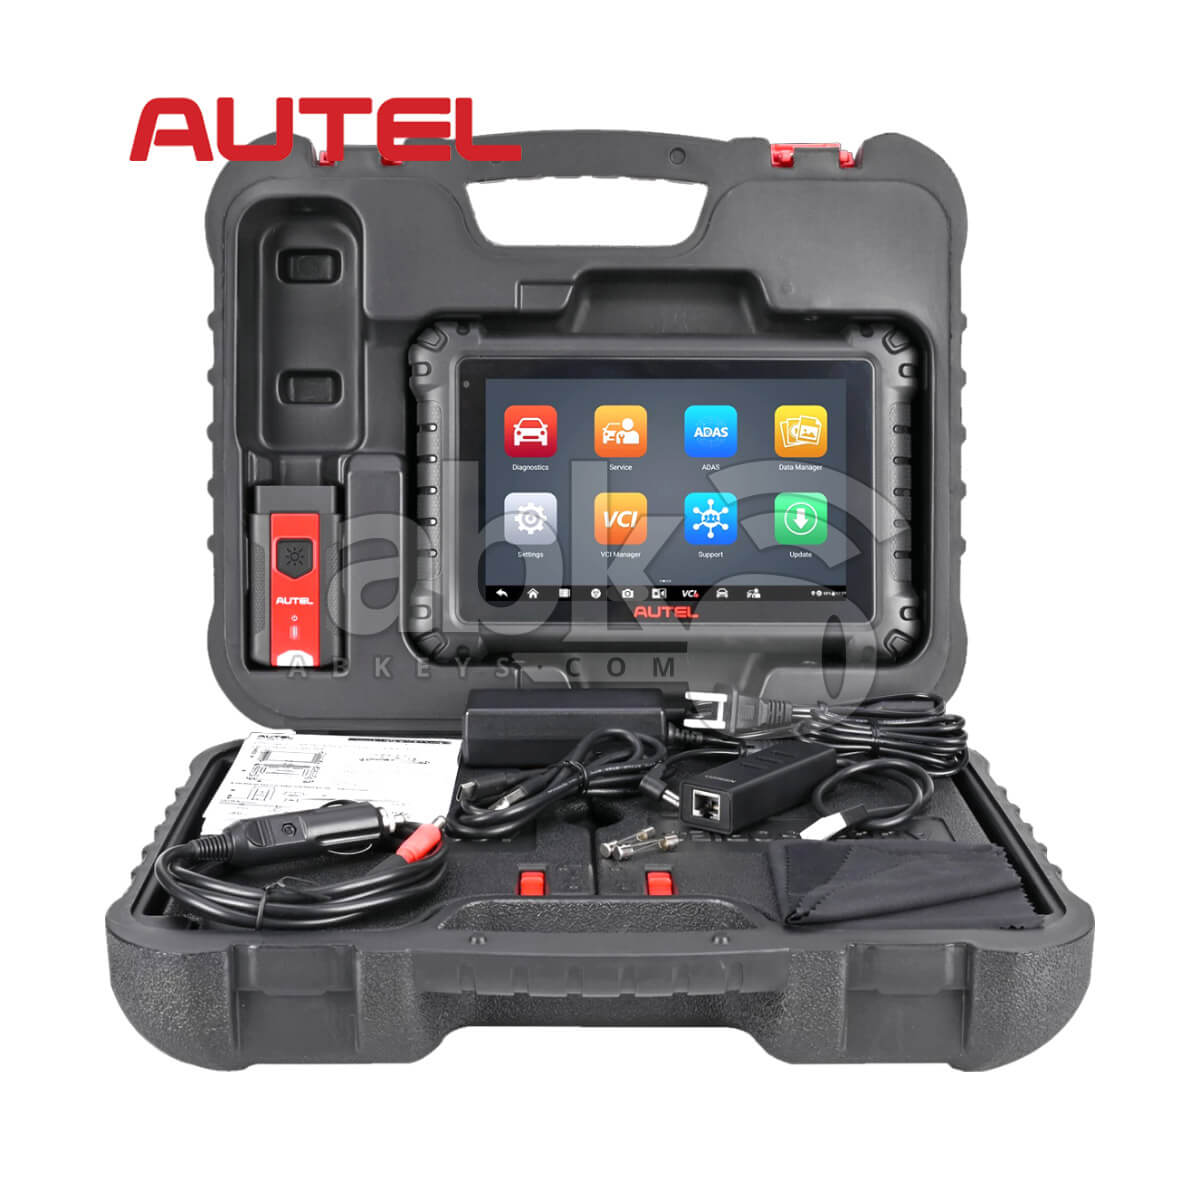 Autel MaxiSys MS906 Pro Bi-Directional Diagnostic Scanner with MaxiVCI V200